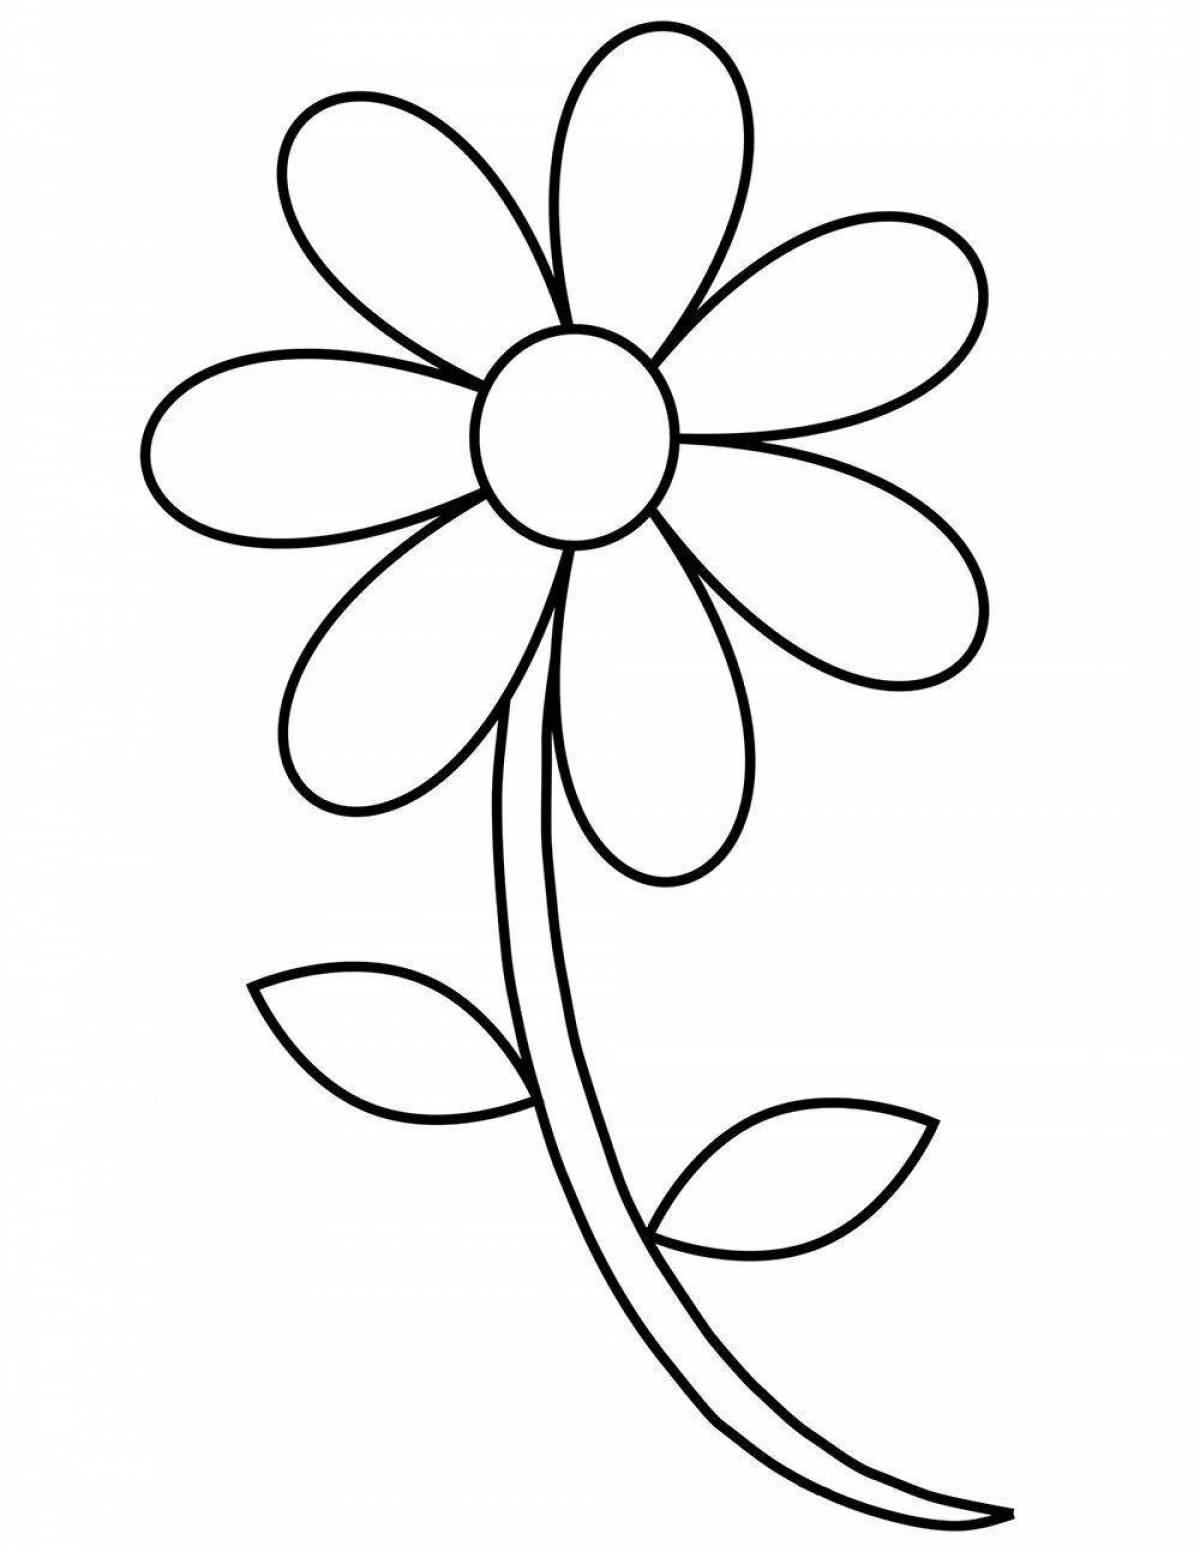 Skillfully designed coloring page with seven colors